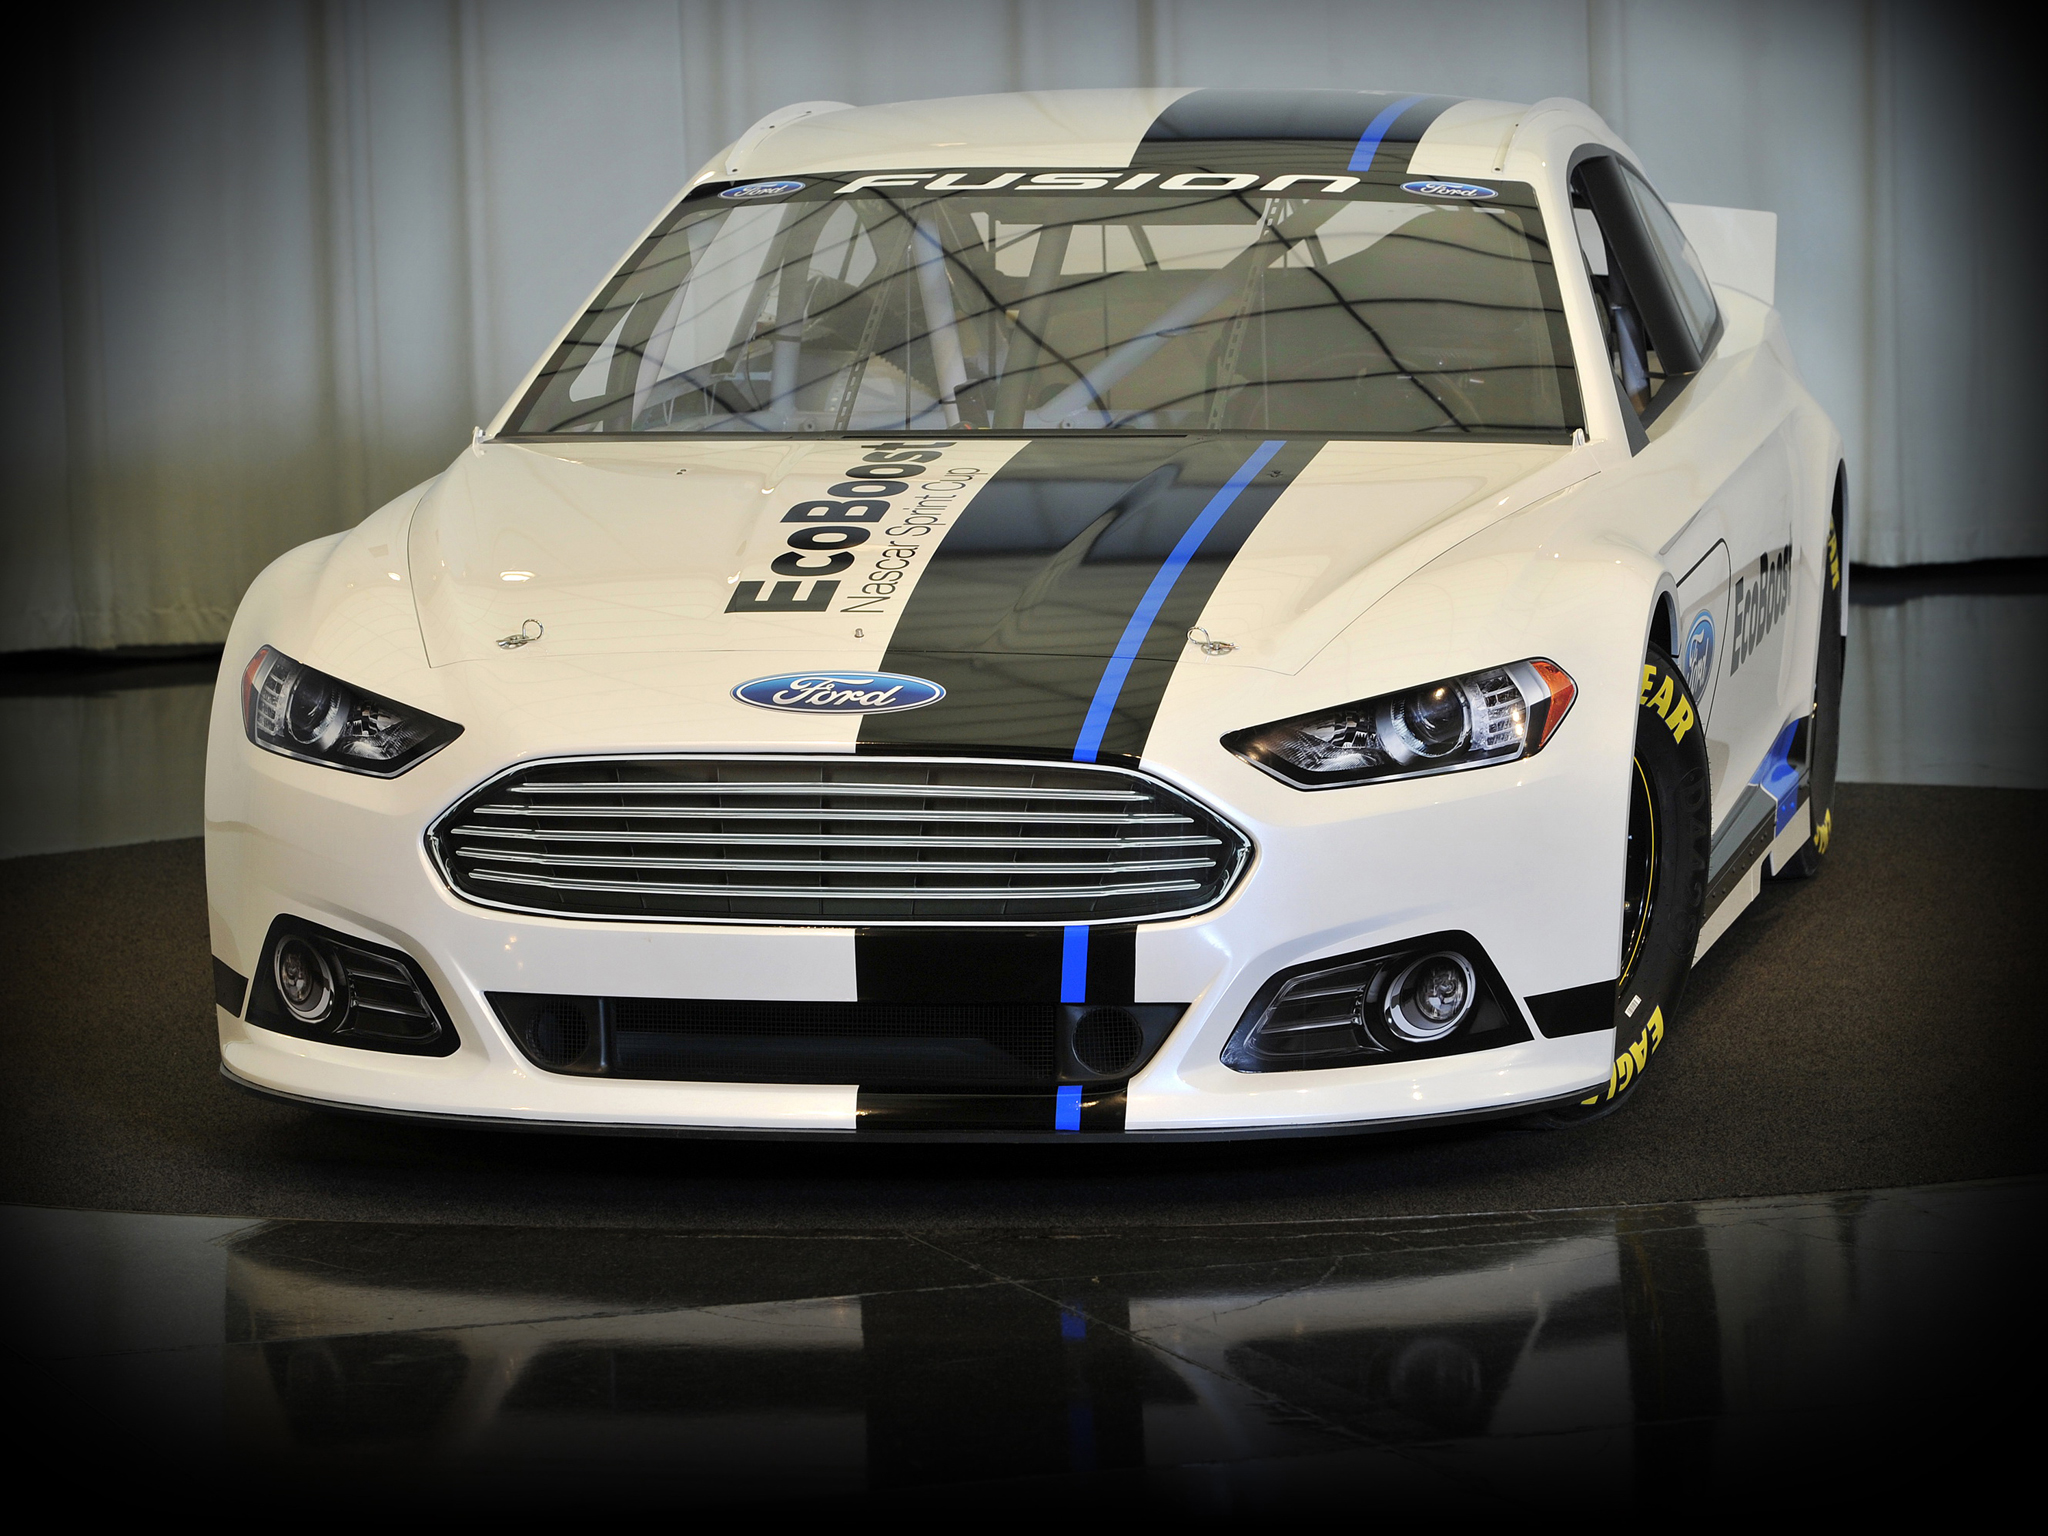 2012, Ford, Fusion, Nascar, Sprint, Cup, Race, Racing Wallpaper